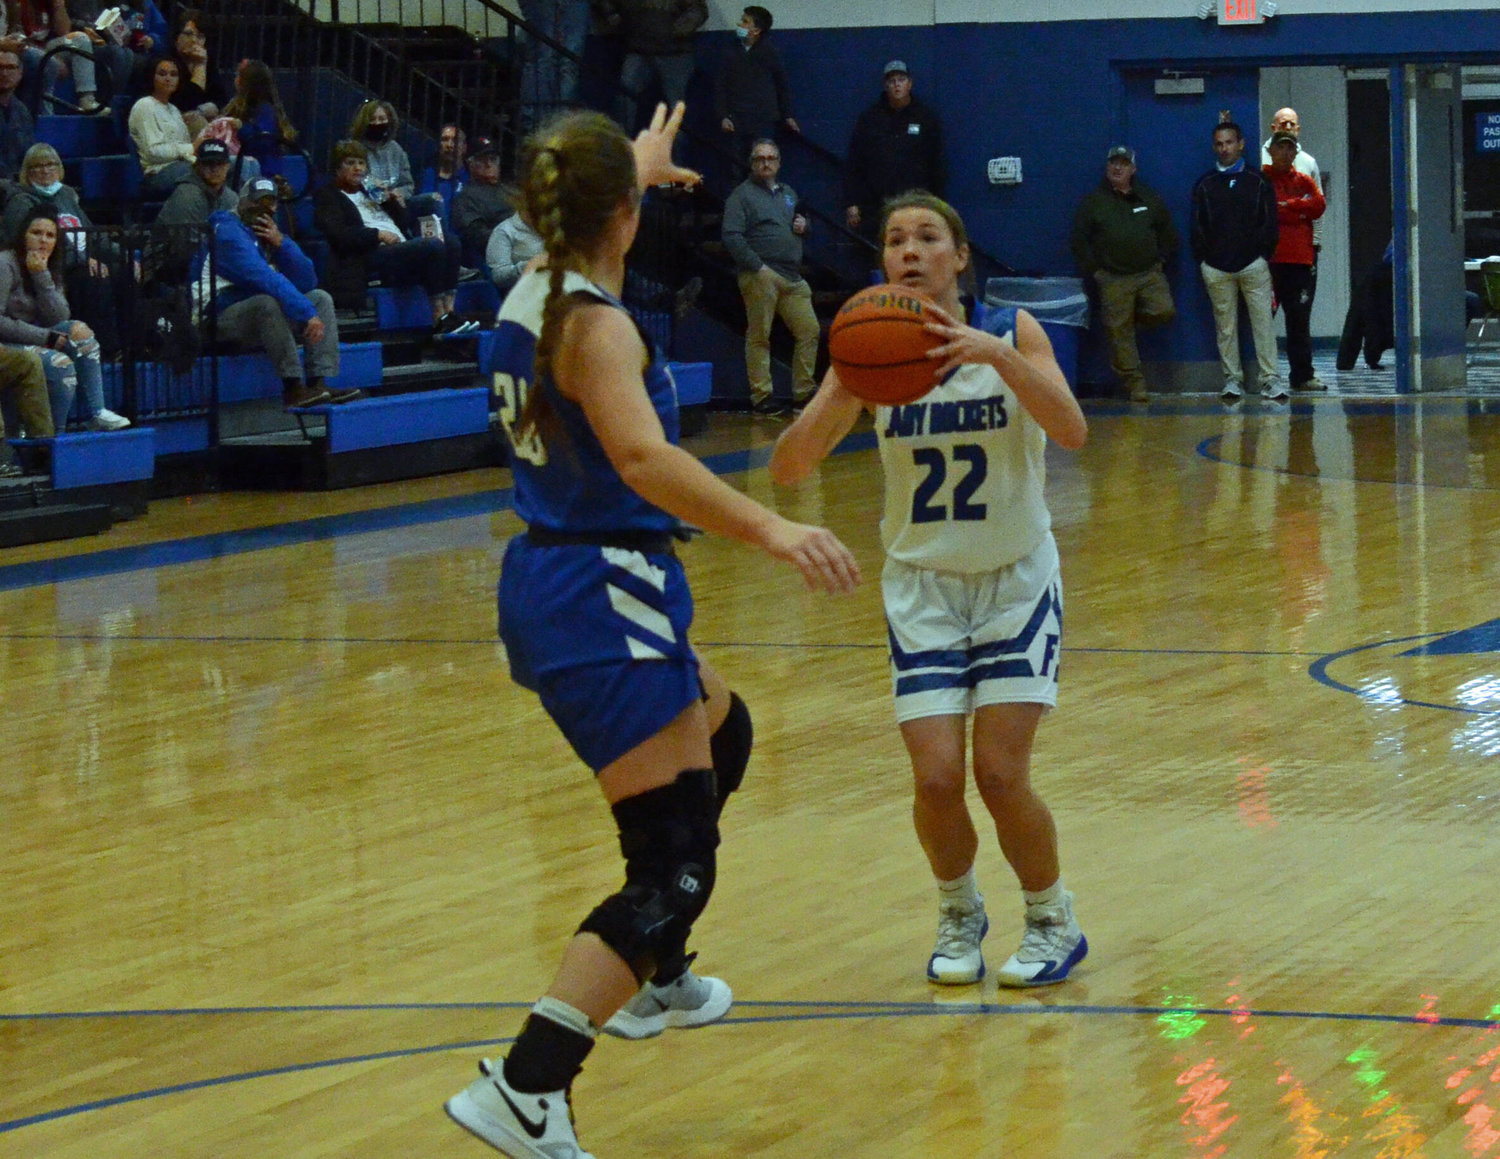 Addison Bunty scored a team-high 12 points and had a pair of three-pointers in the season opener for the Lady Rockets.